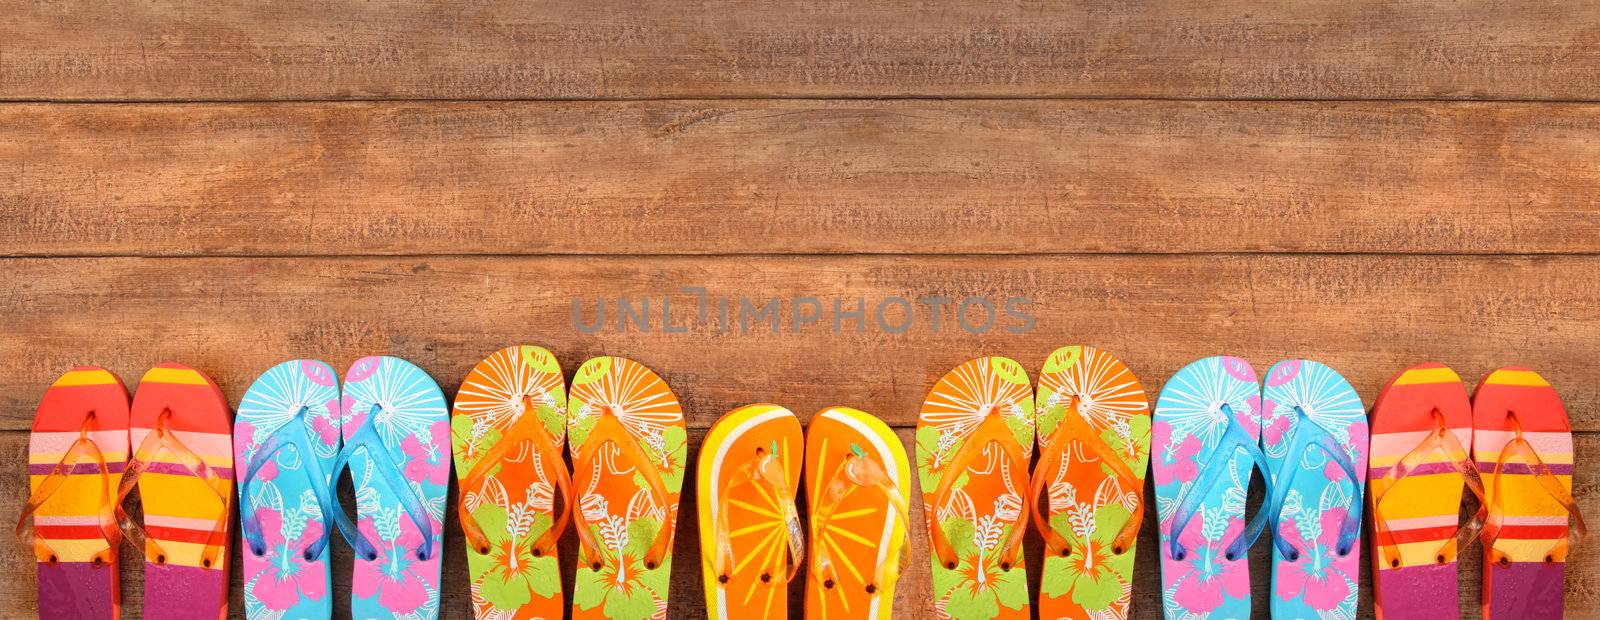 Brightly colored flip-flops on wood  by Sandralise